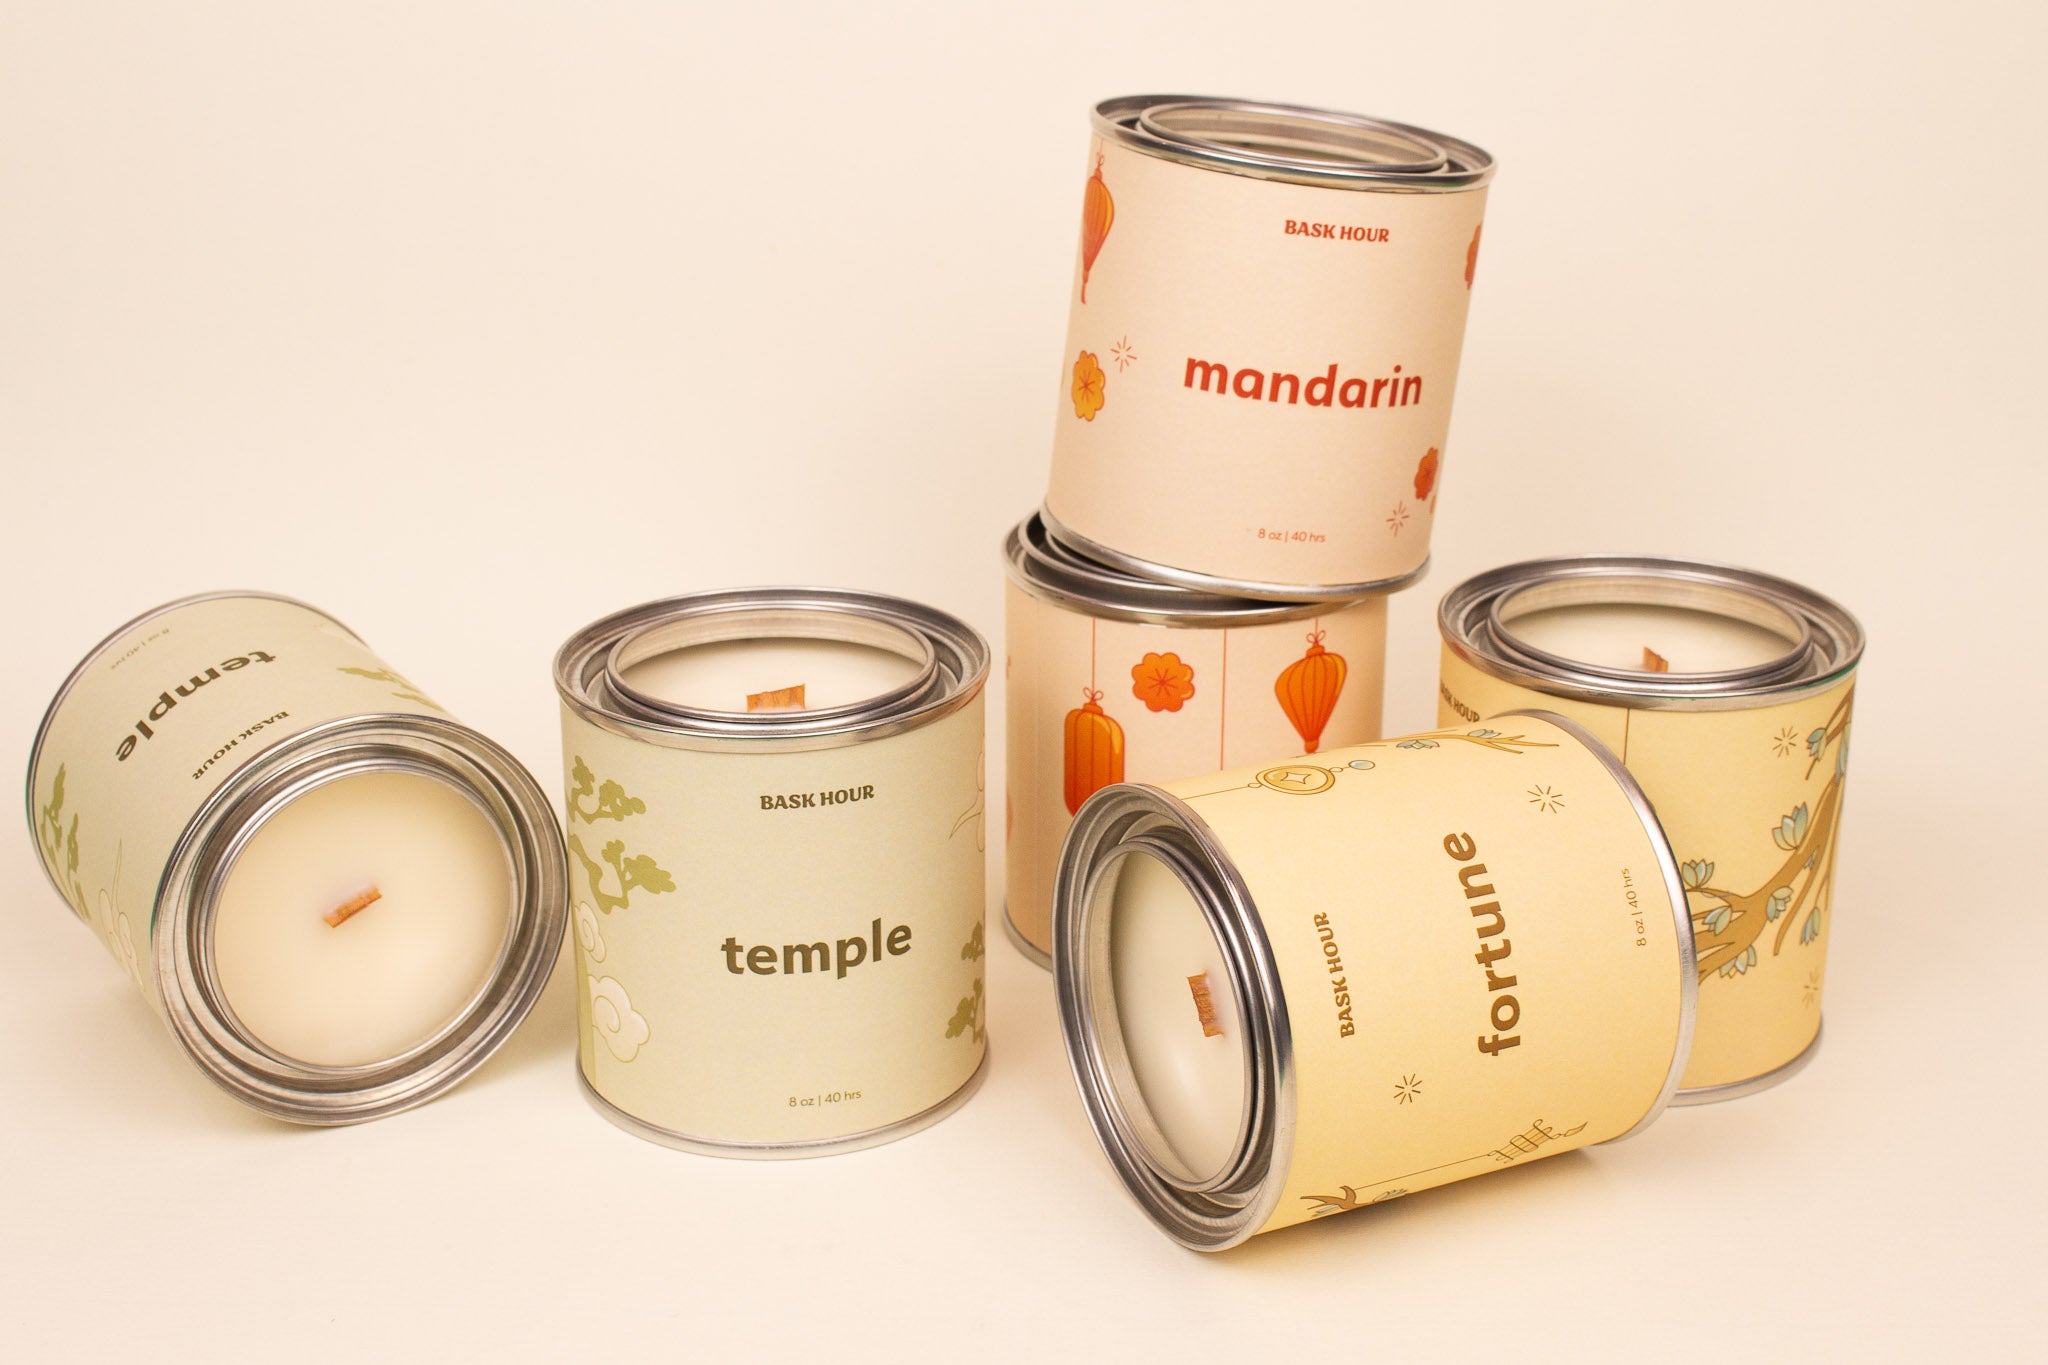 Enjoy all 3 limited edition candles (Fortune, Mandarin, & Temple) to give as the perfect gift or cherished individually. Made in Montréal with an all natural wax blend of soy, coconut & beeswax. Wood wicks that are FSC certified for an eco-friendly clean burn and premium fragrance oils free from parabens & phthalates.